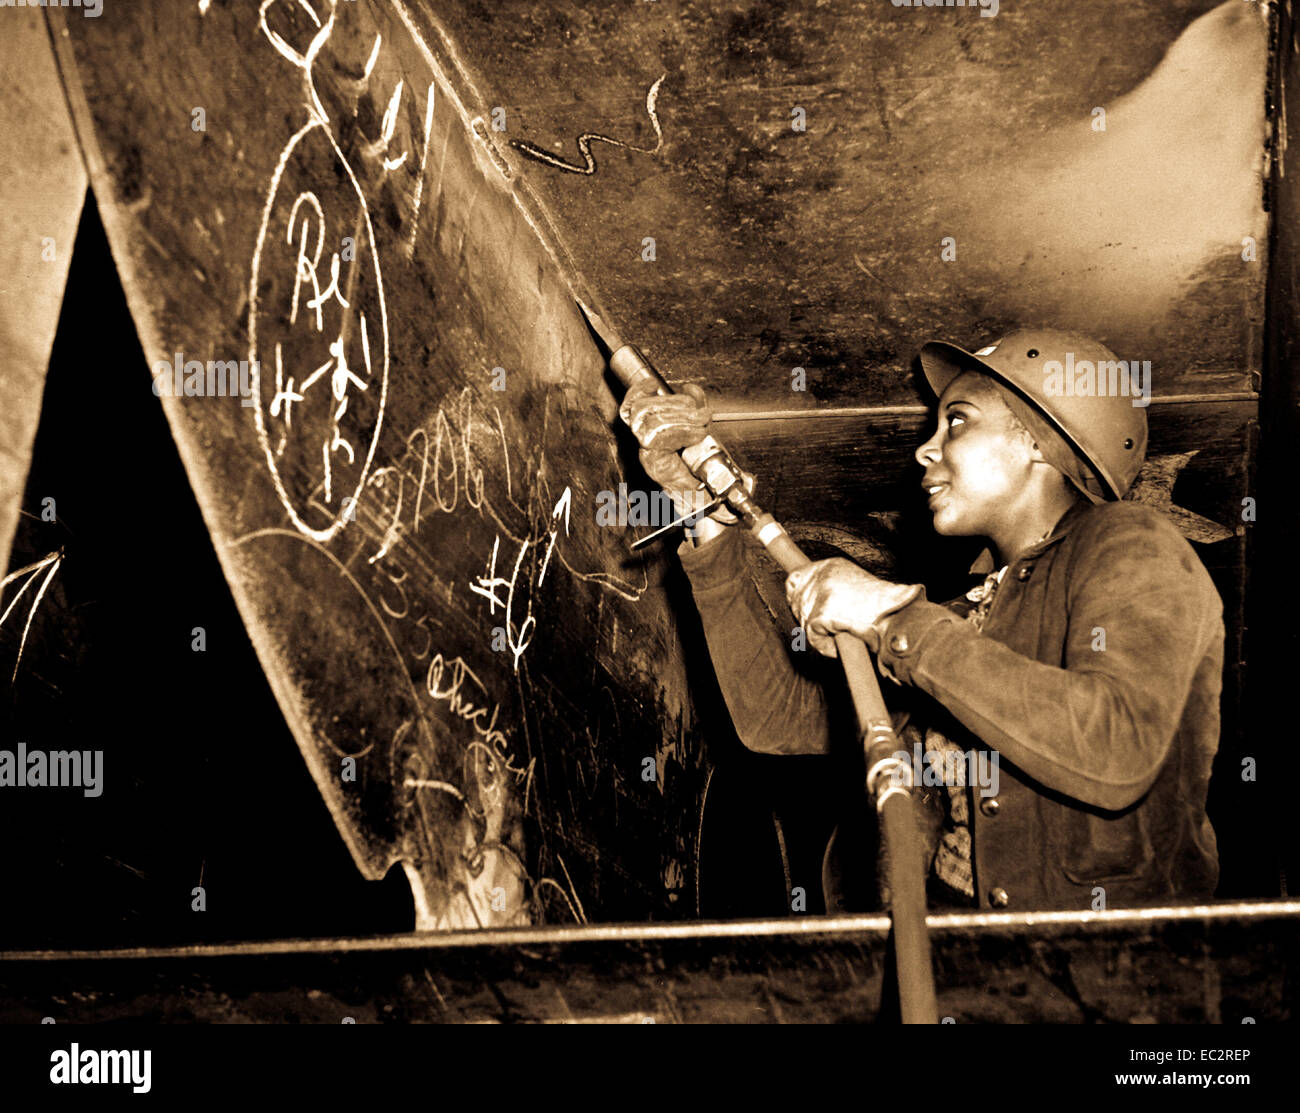 Kaiser shipyards, Richmond, Calif.  Miss  Eastine Cowner, a former waitress, is helping in her job as a scaler to construct the Liberty Ship SS George Washington Carver launched on May 7, 1943.  Photo by E. F. Joseph. Stock Photo